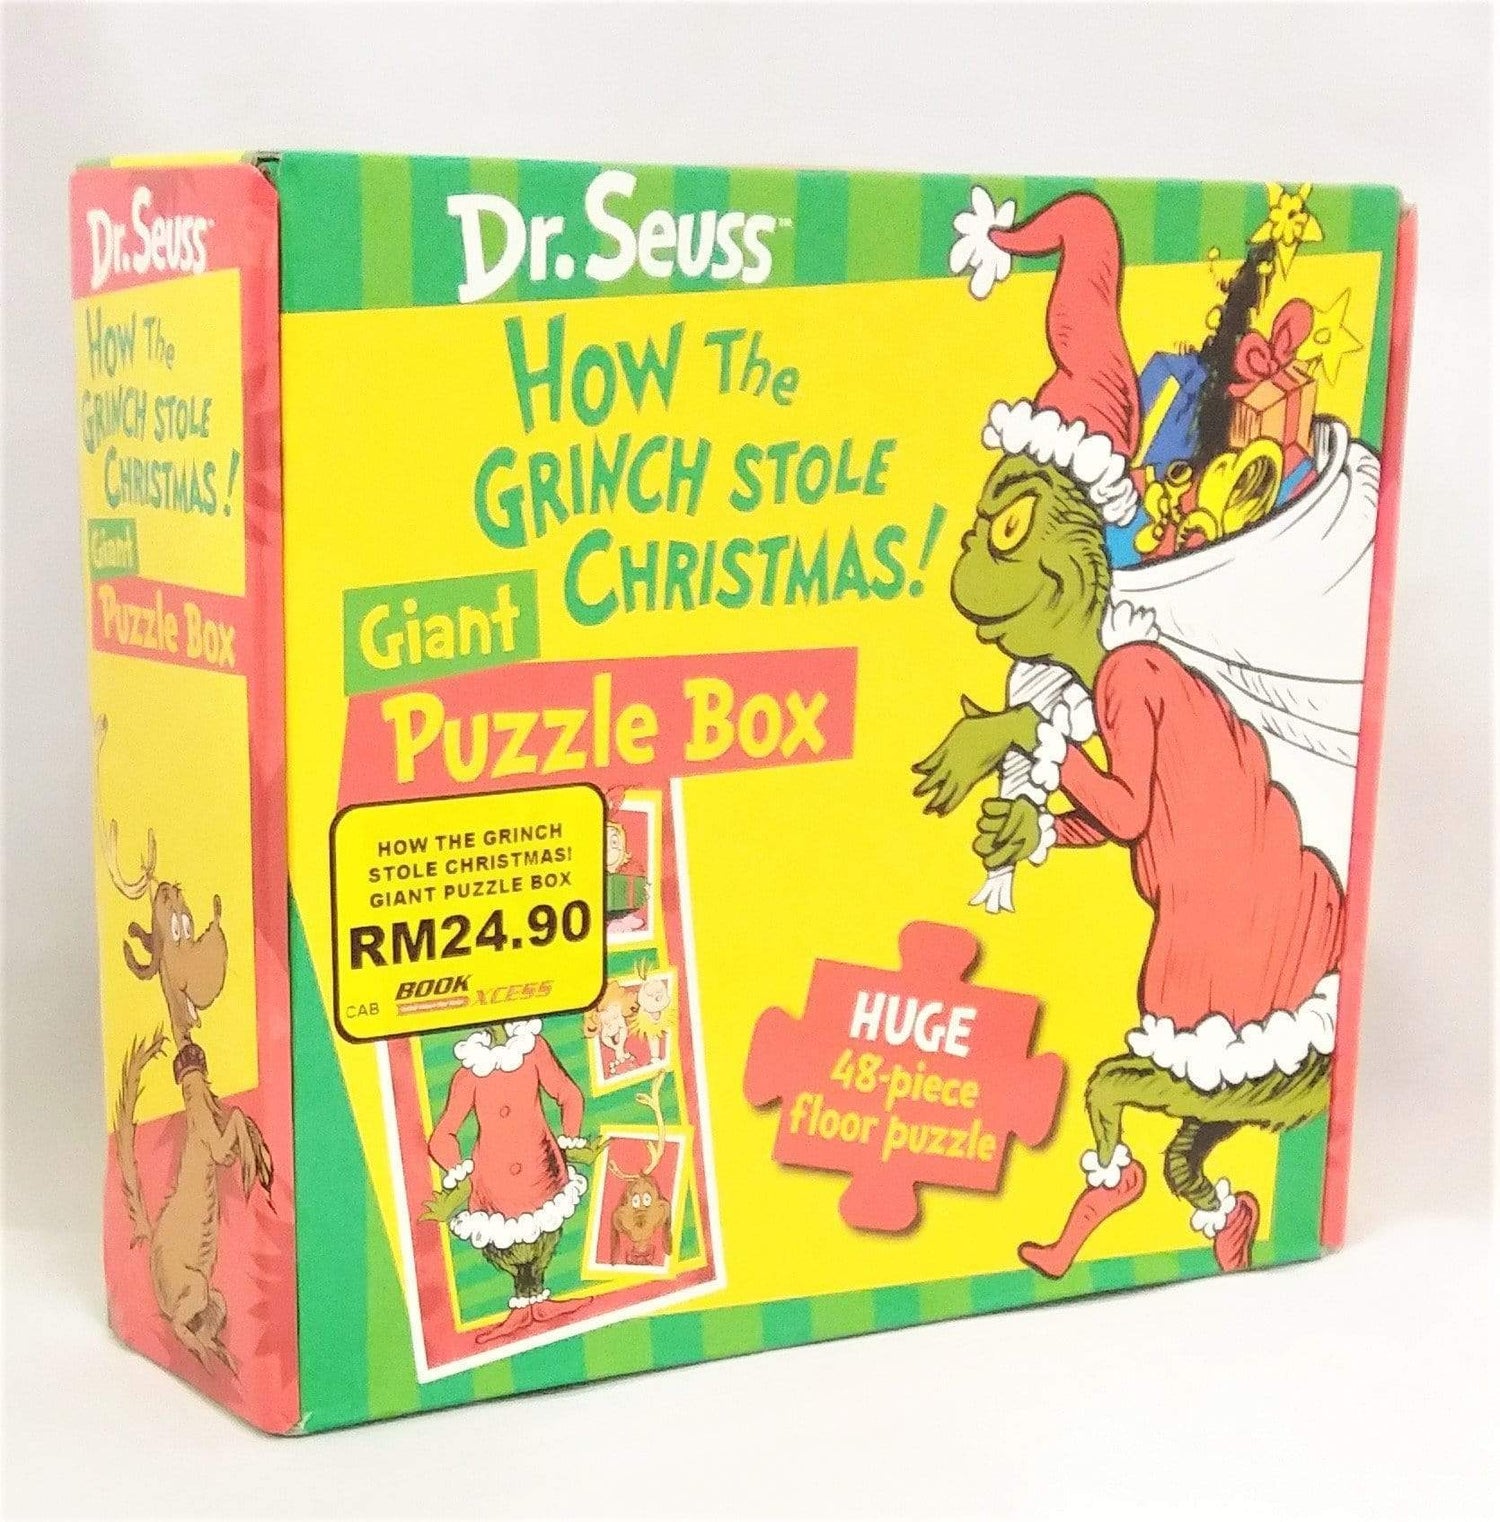 How The Grinch Stole Christmas! Giant Puzzle Box (Huge 48-Piece Floor Puzzle)